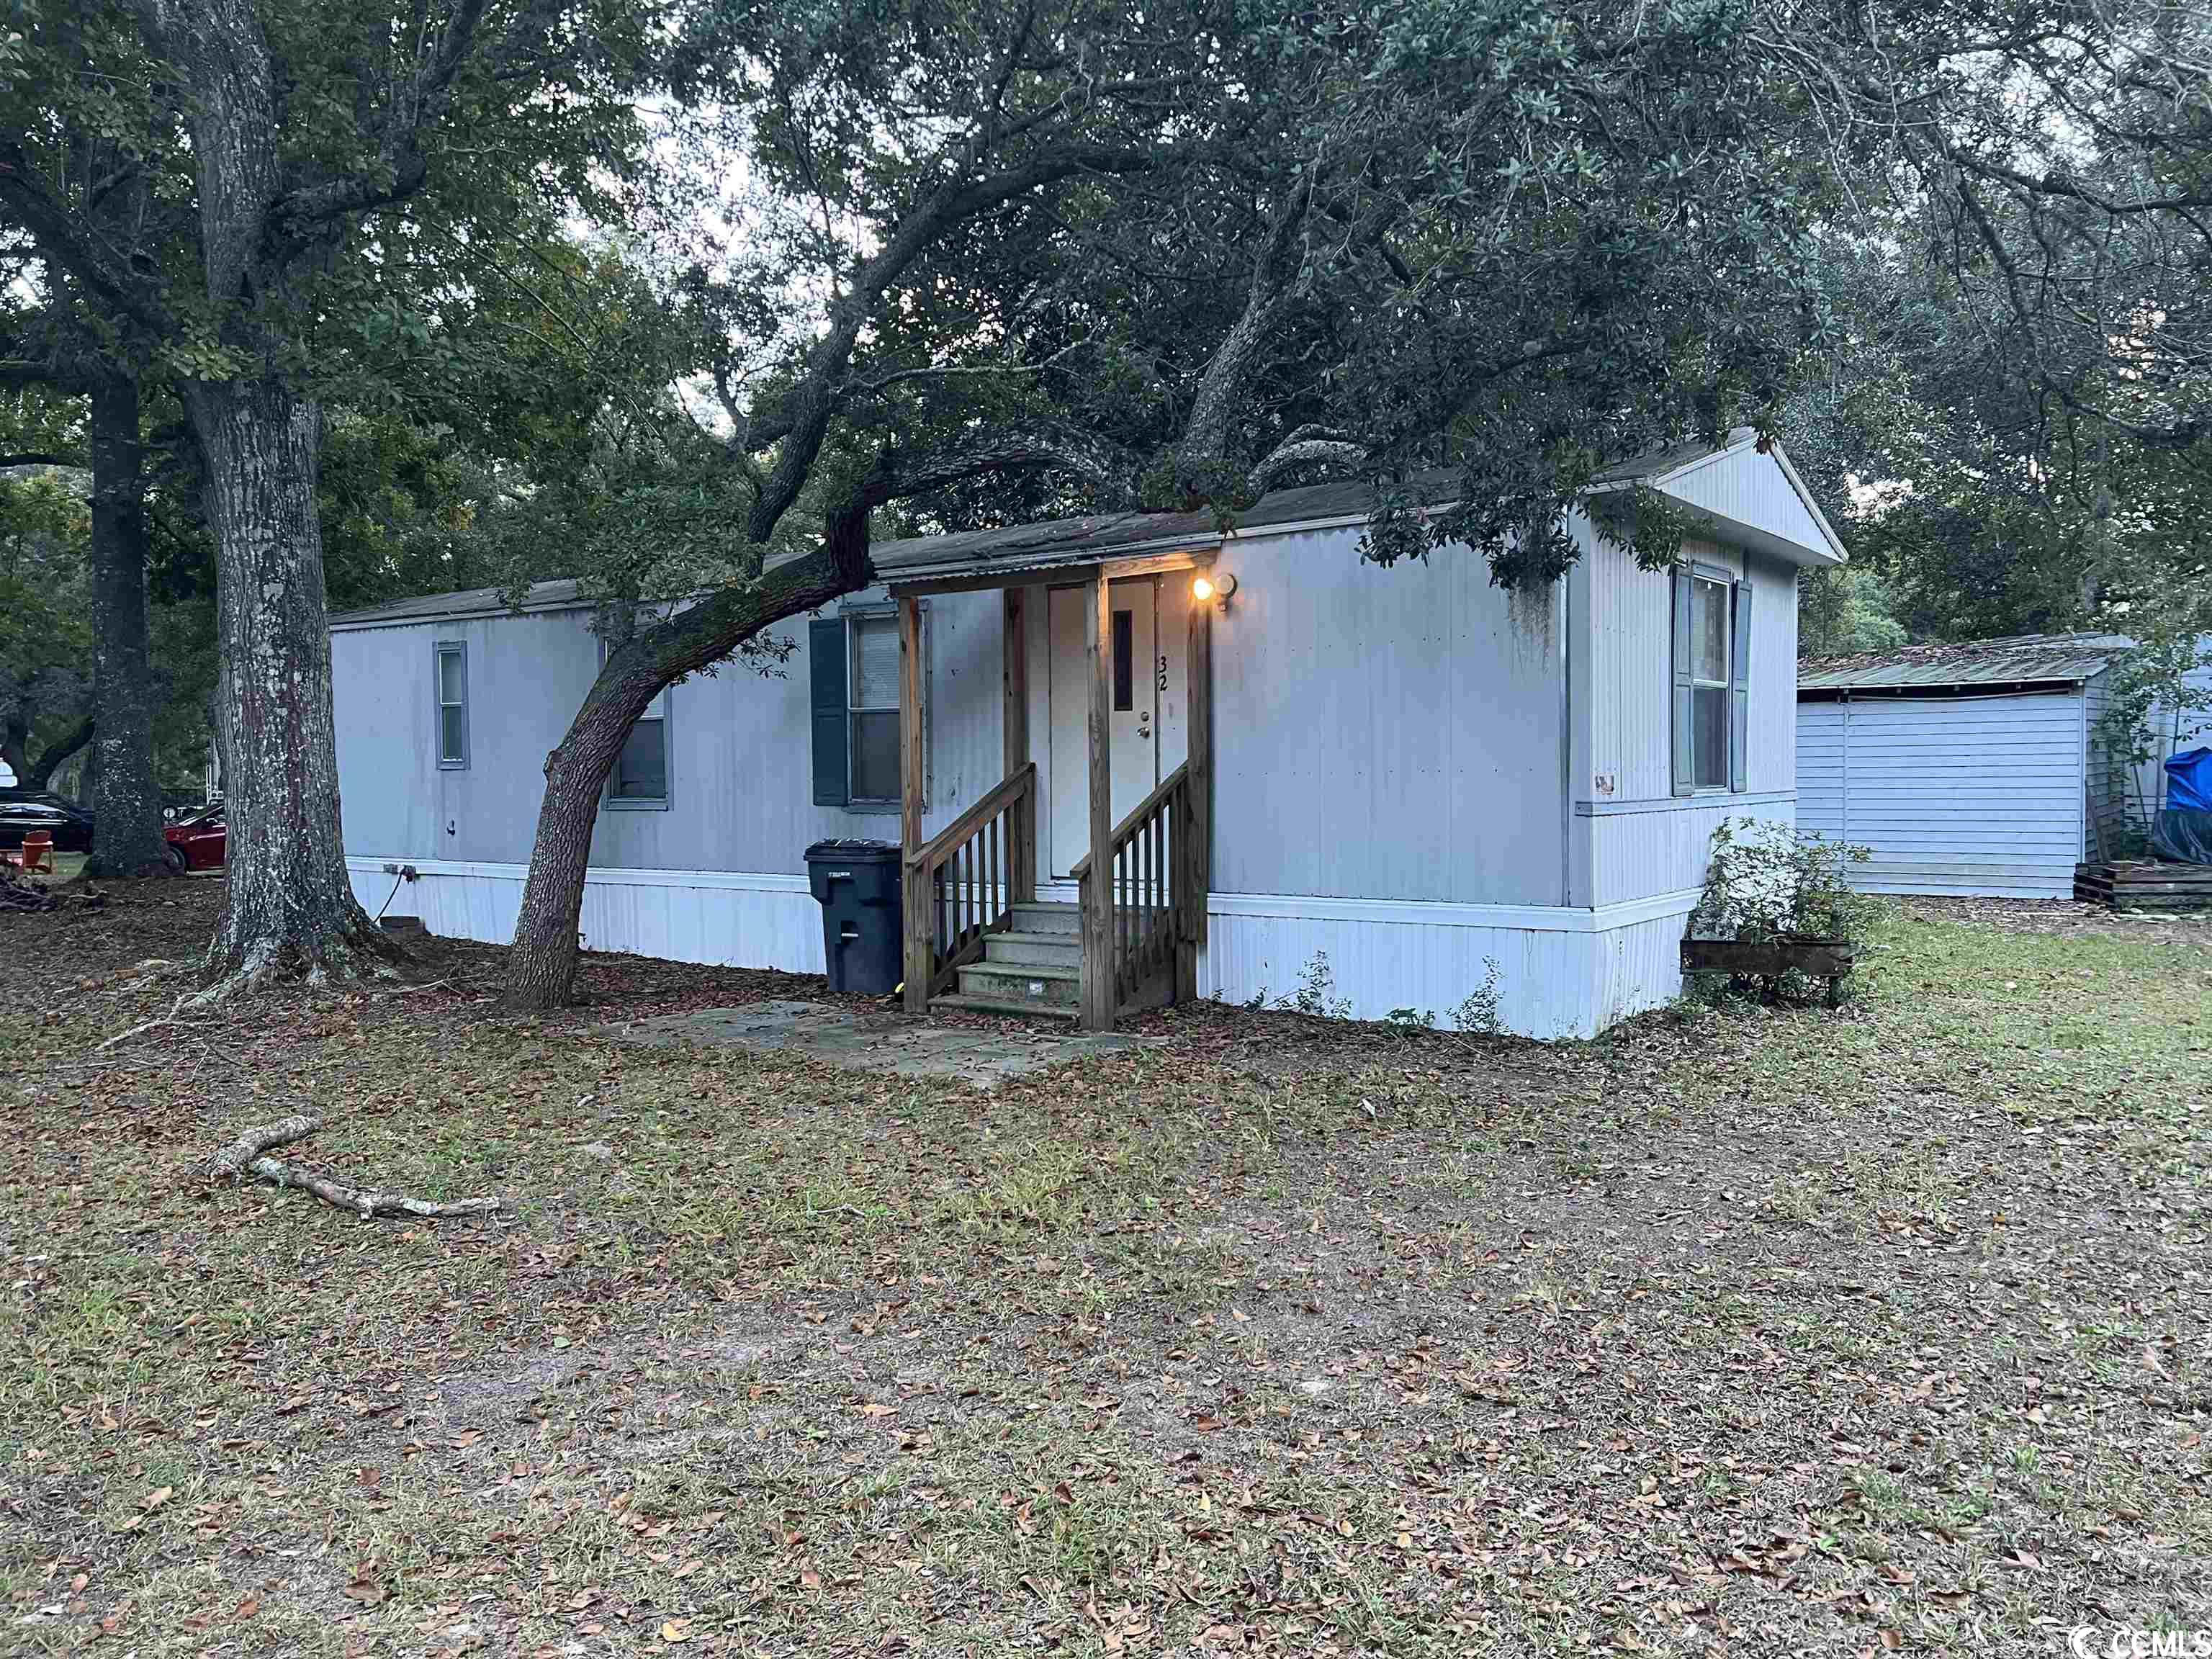 vacation home!!  55+ community.  right off hwy 17 minutes to murrells inlet & the famous restaurant row.  extremely low lot rent. call for your showing today!